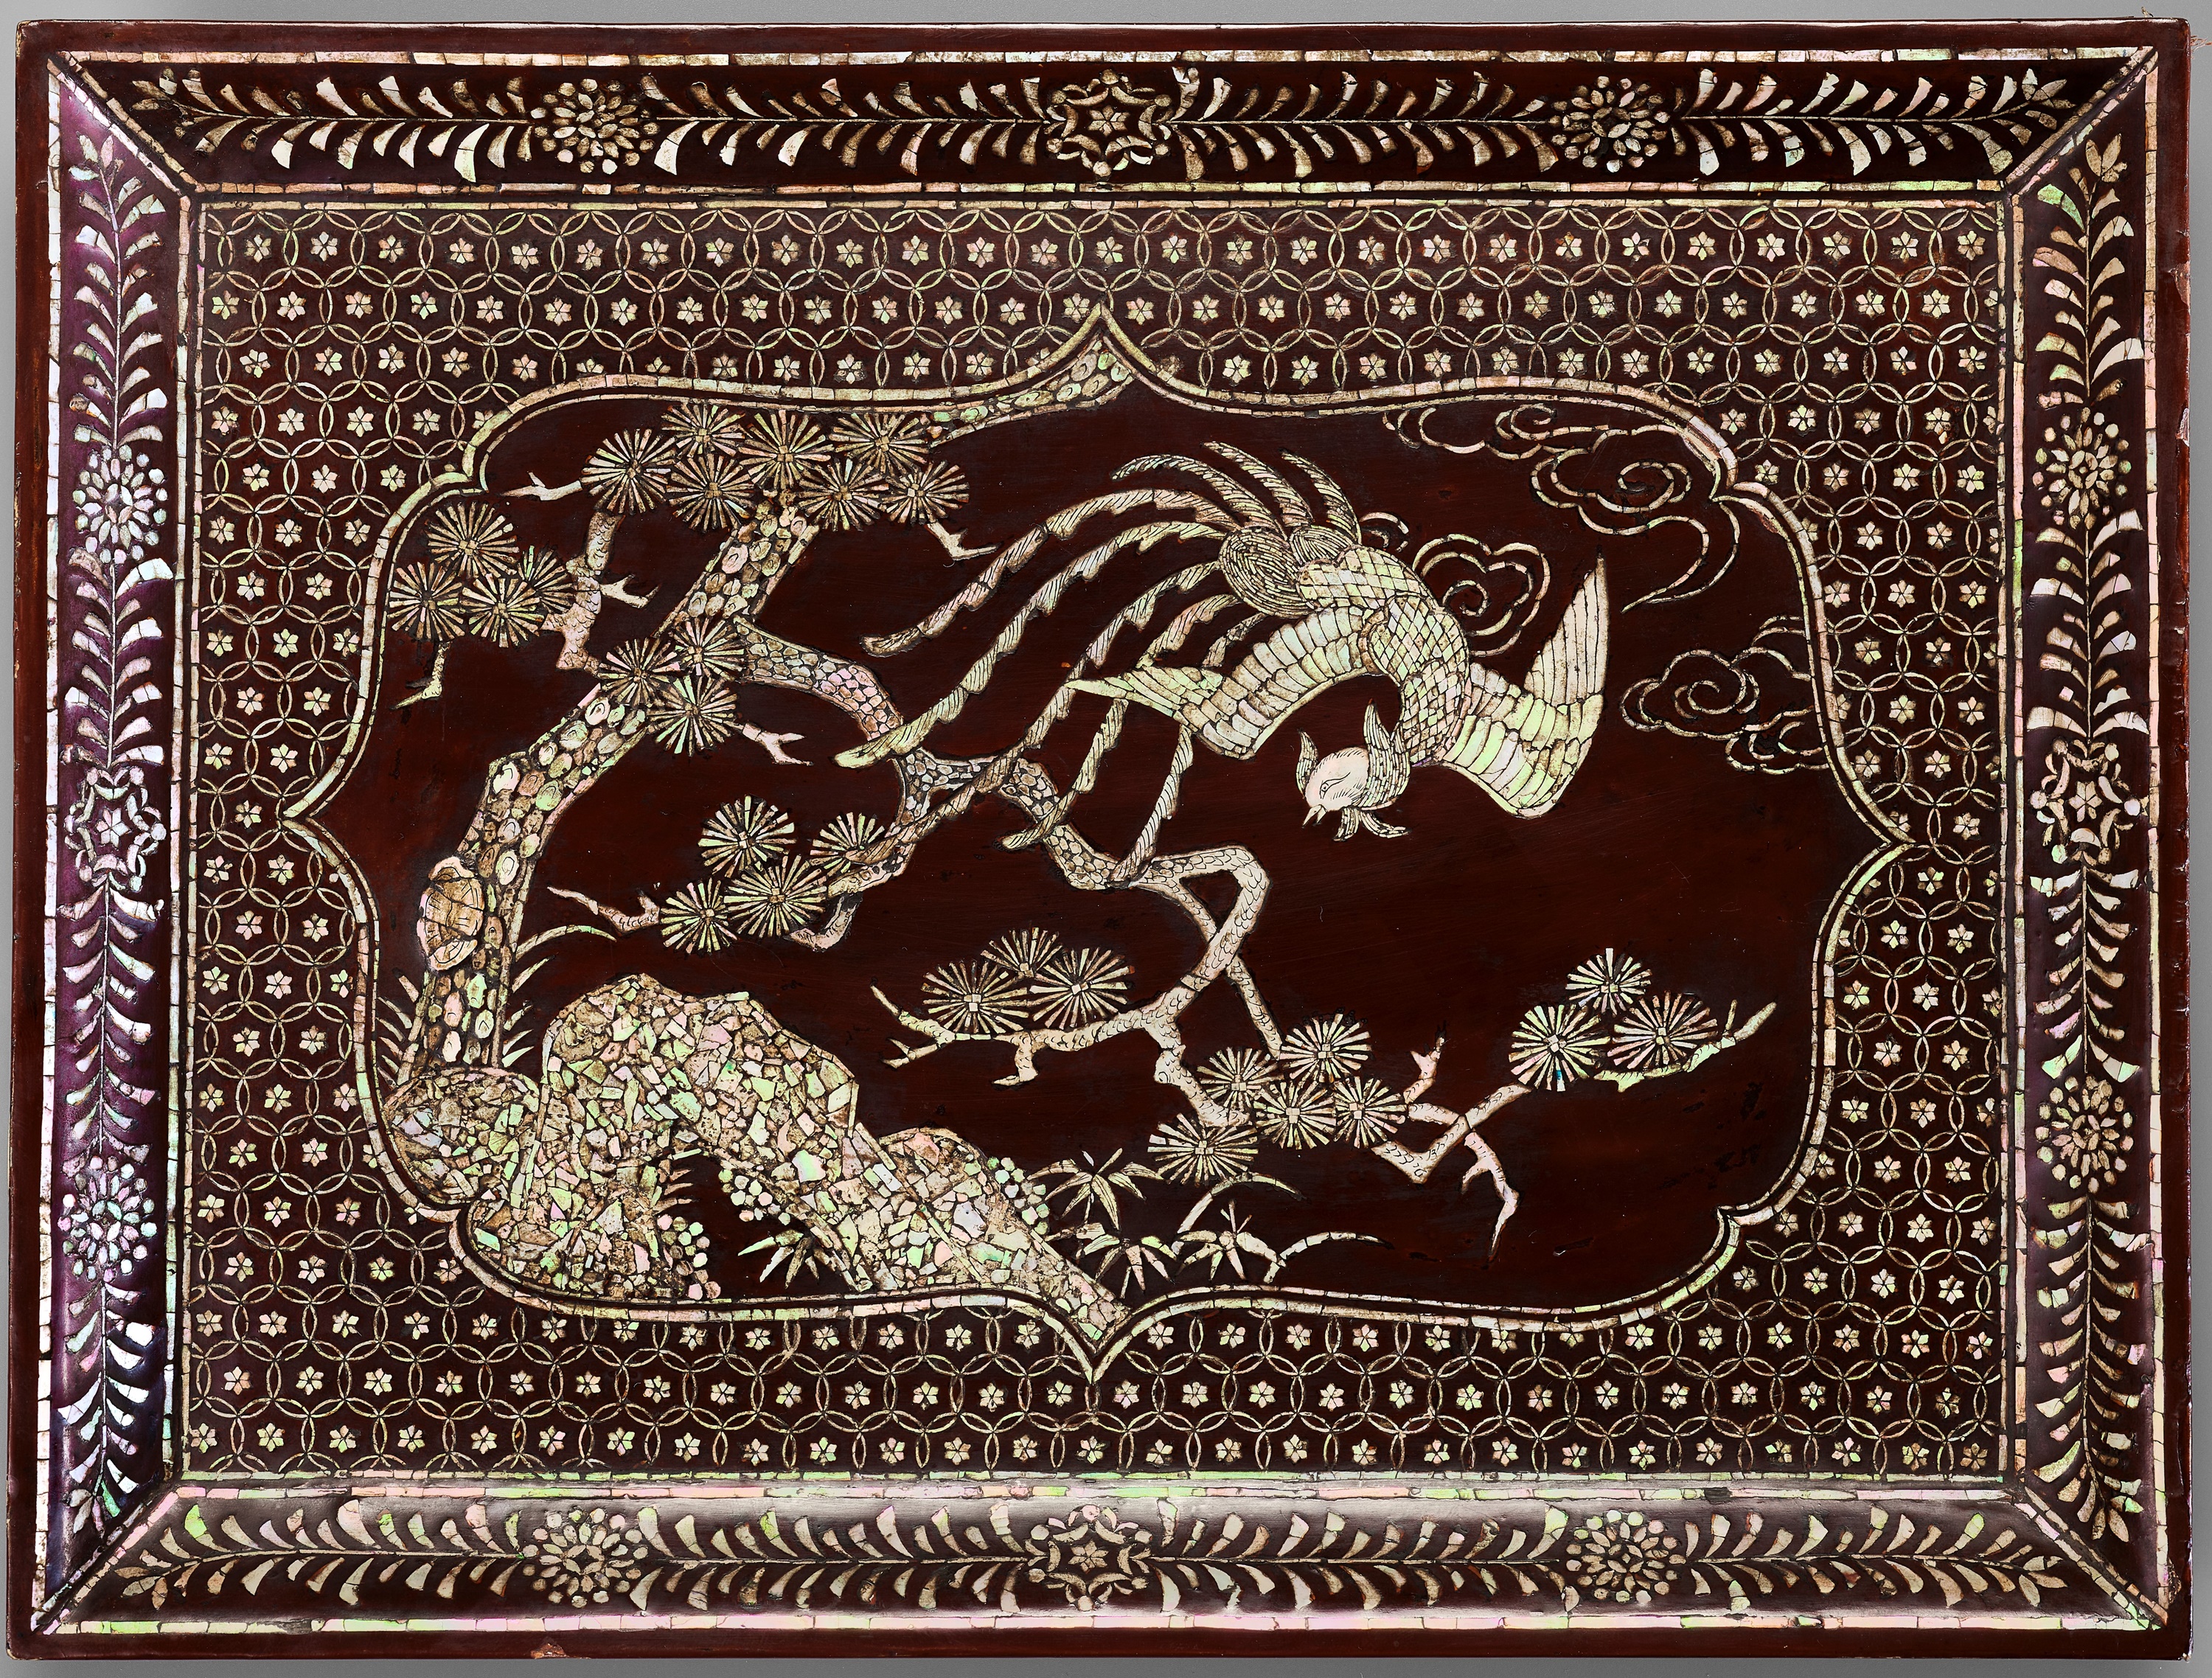 A RARE INLAID LACQUER 'PHOENIX' TRAY, MING DYNASTY